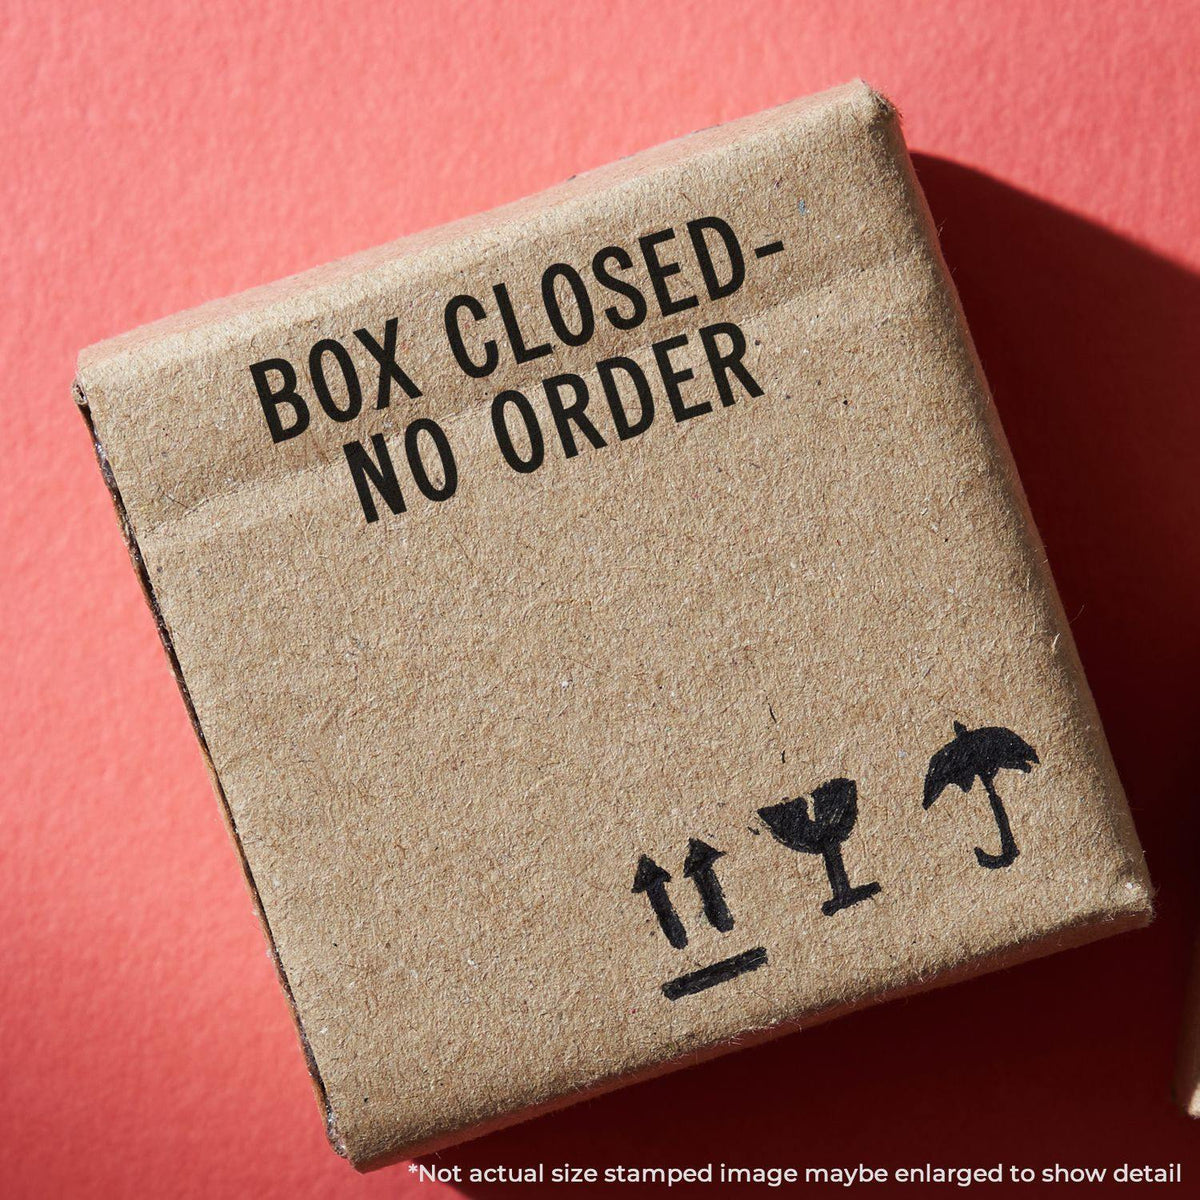 Box Closed No Order Rubber Stamp In Use Photo